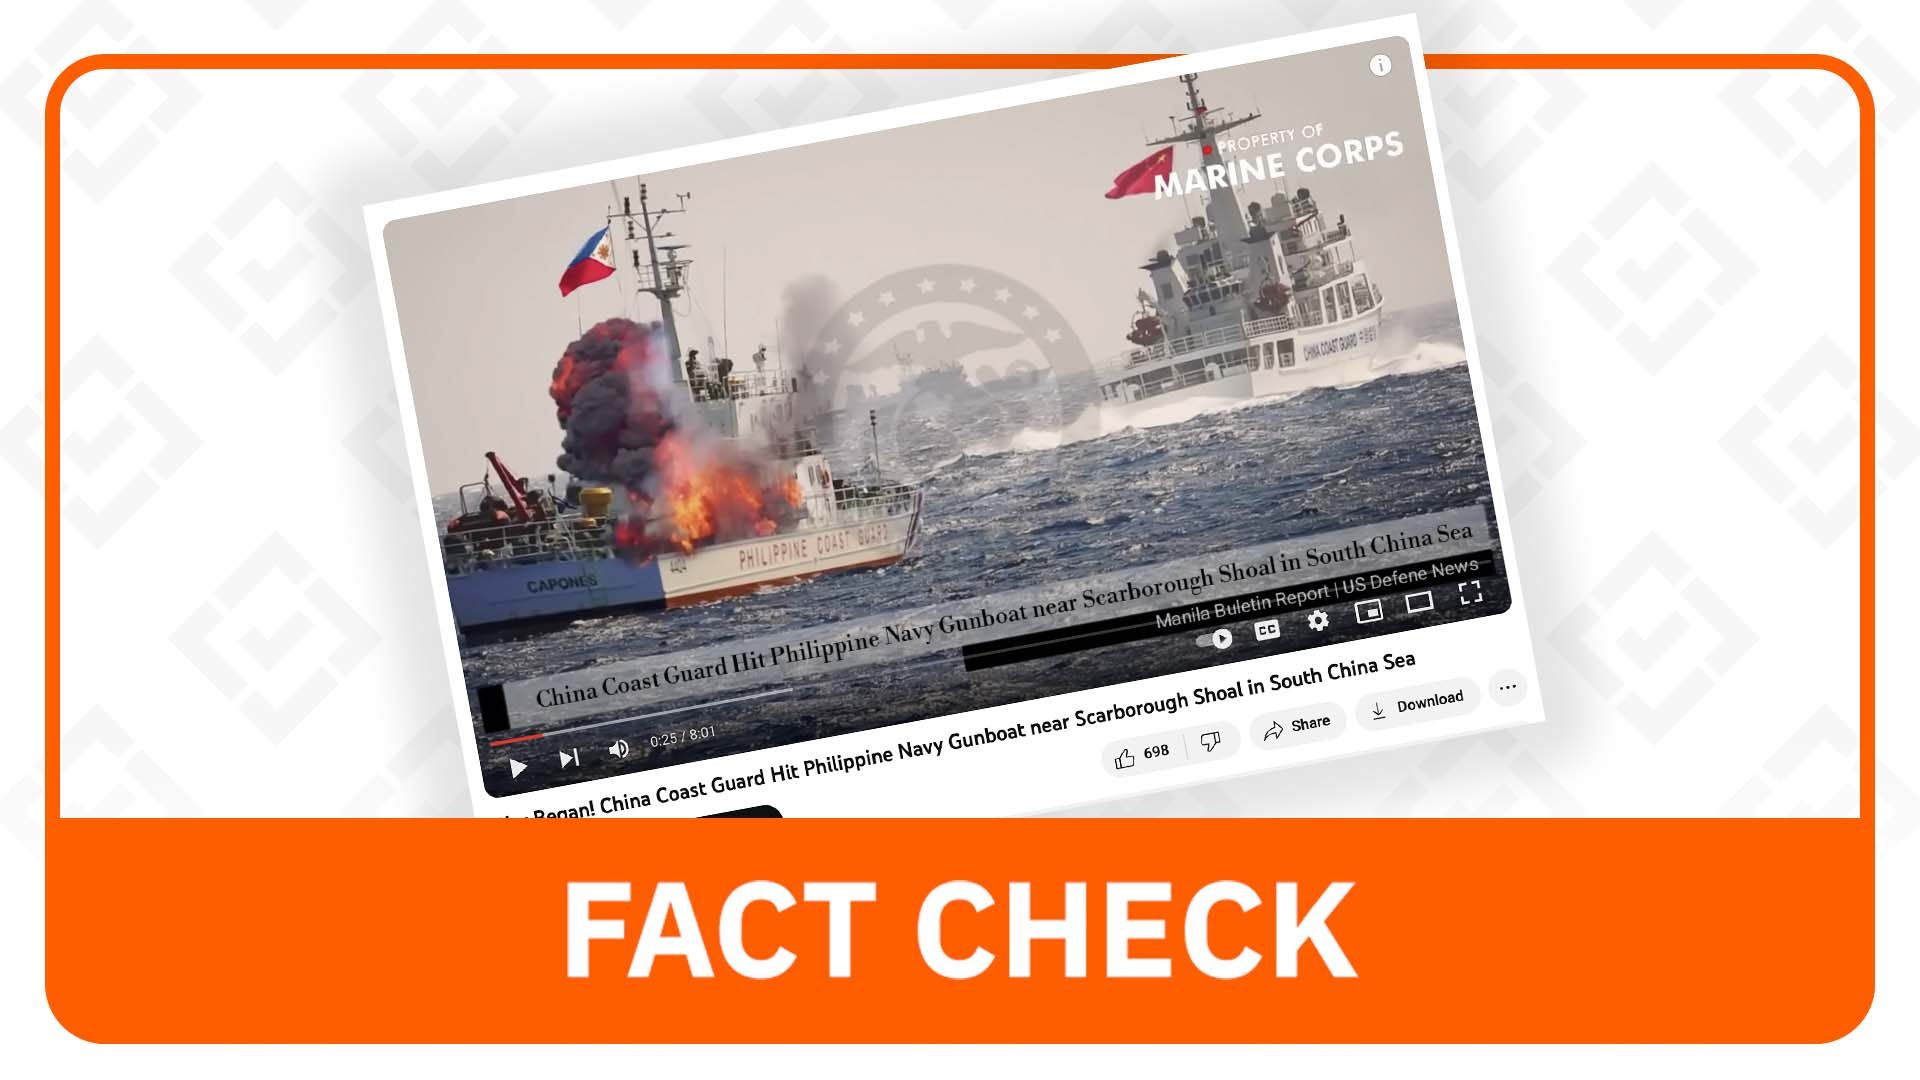 FACT CHECK: China Coast Guard did not fire on PH Navy ship near Scarborough Shoal